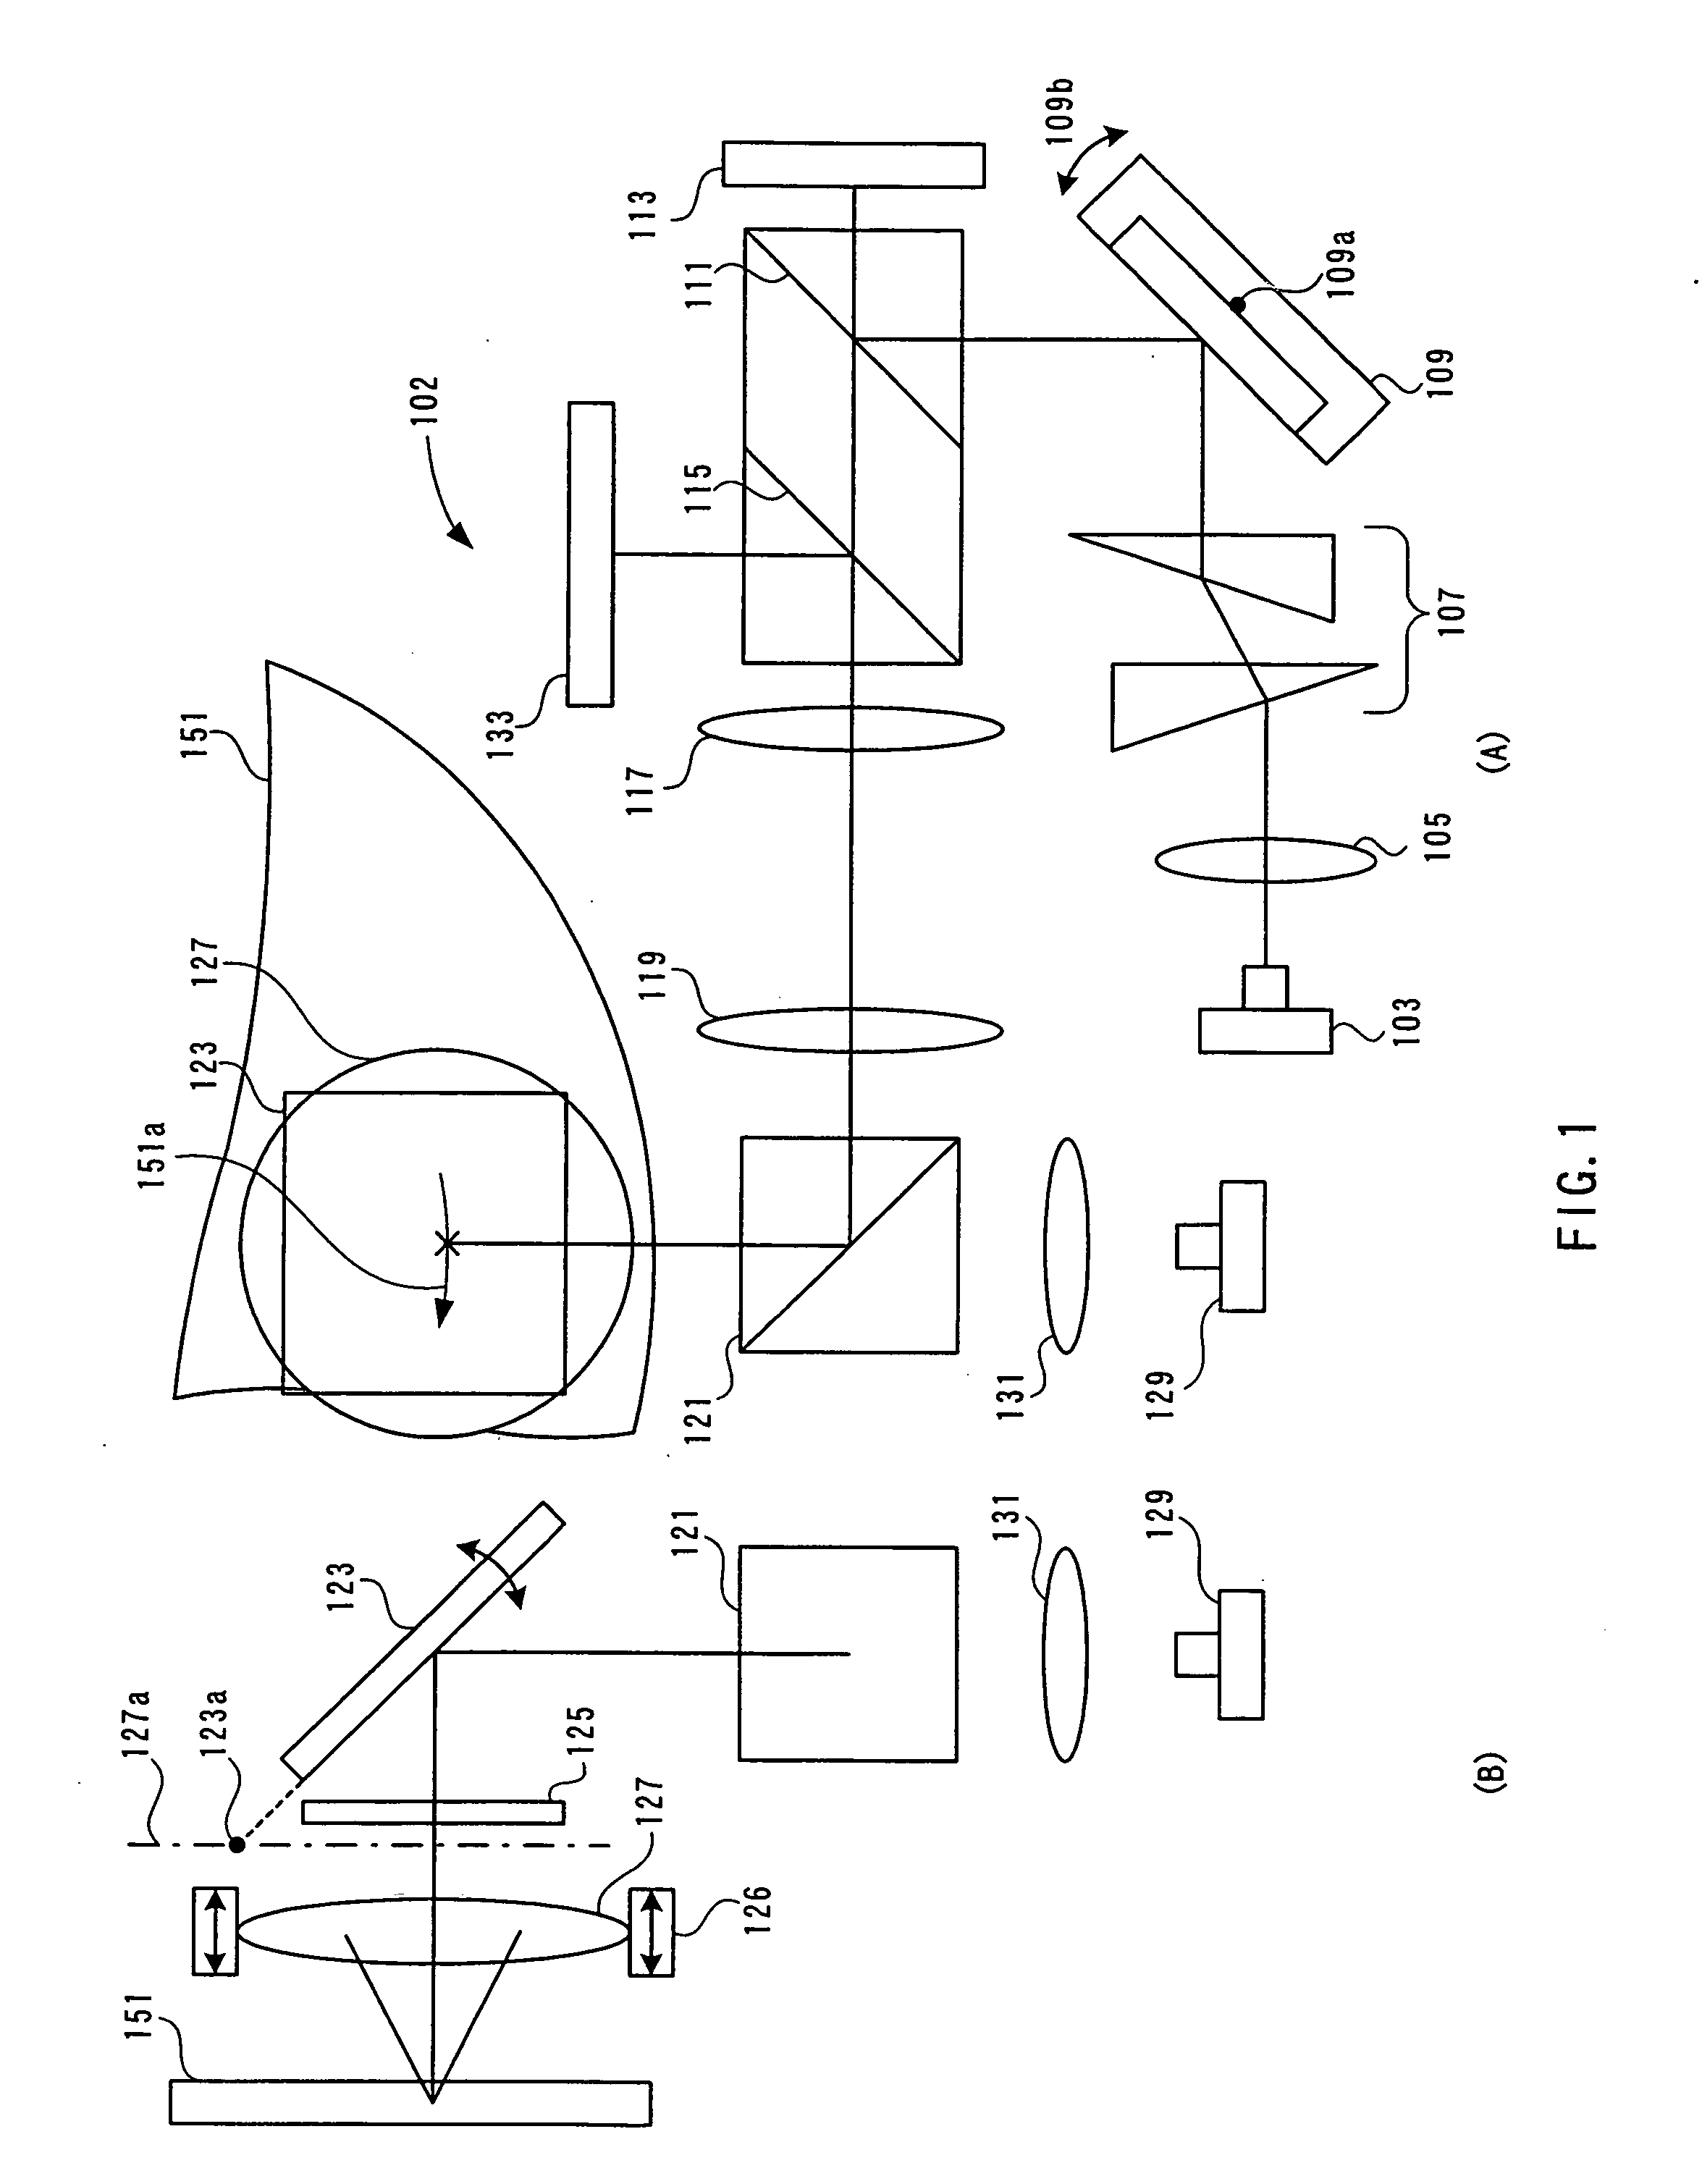 Optical information recording device and optical information reproduction device